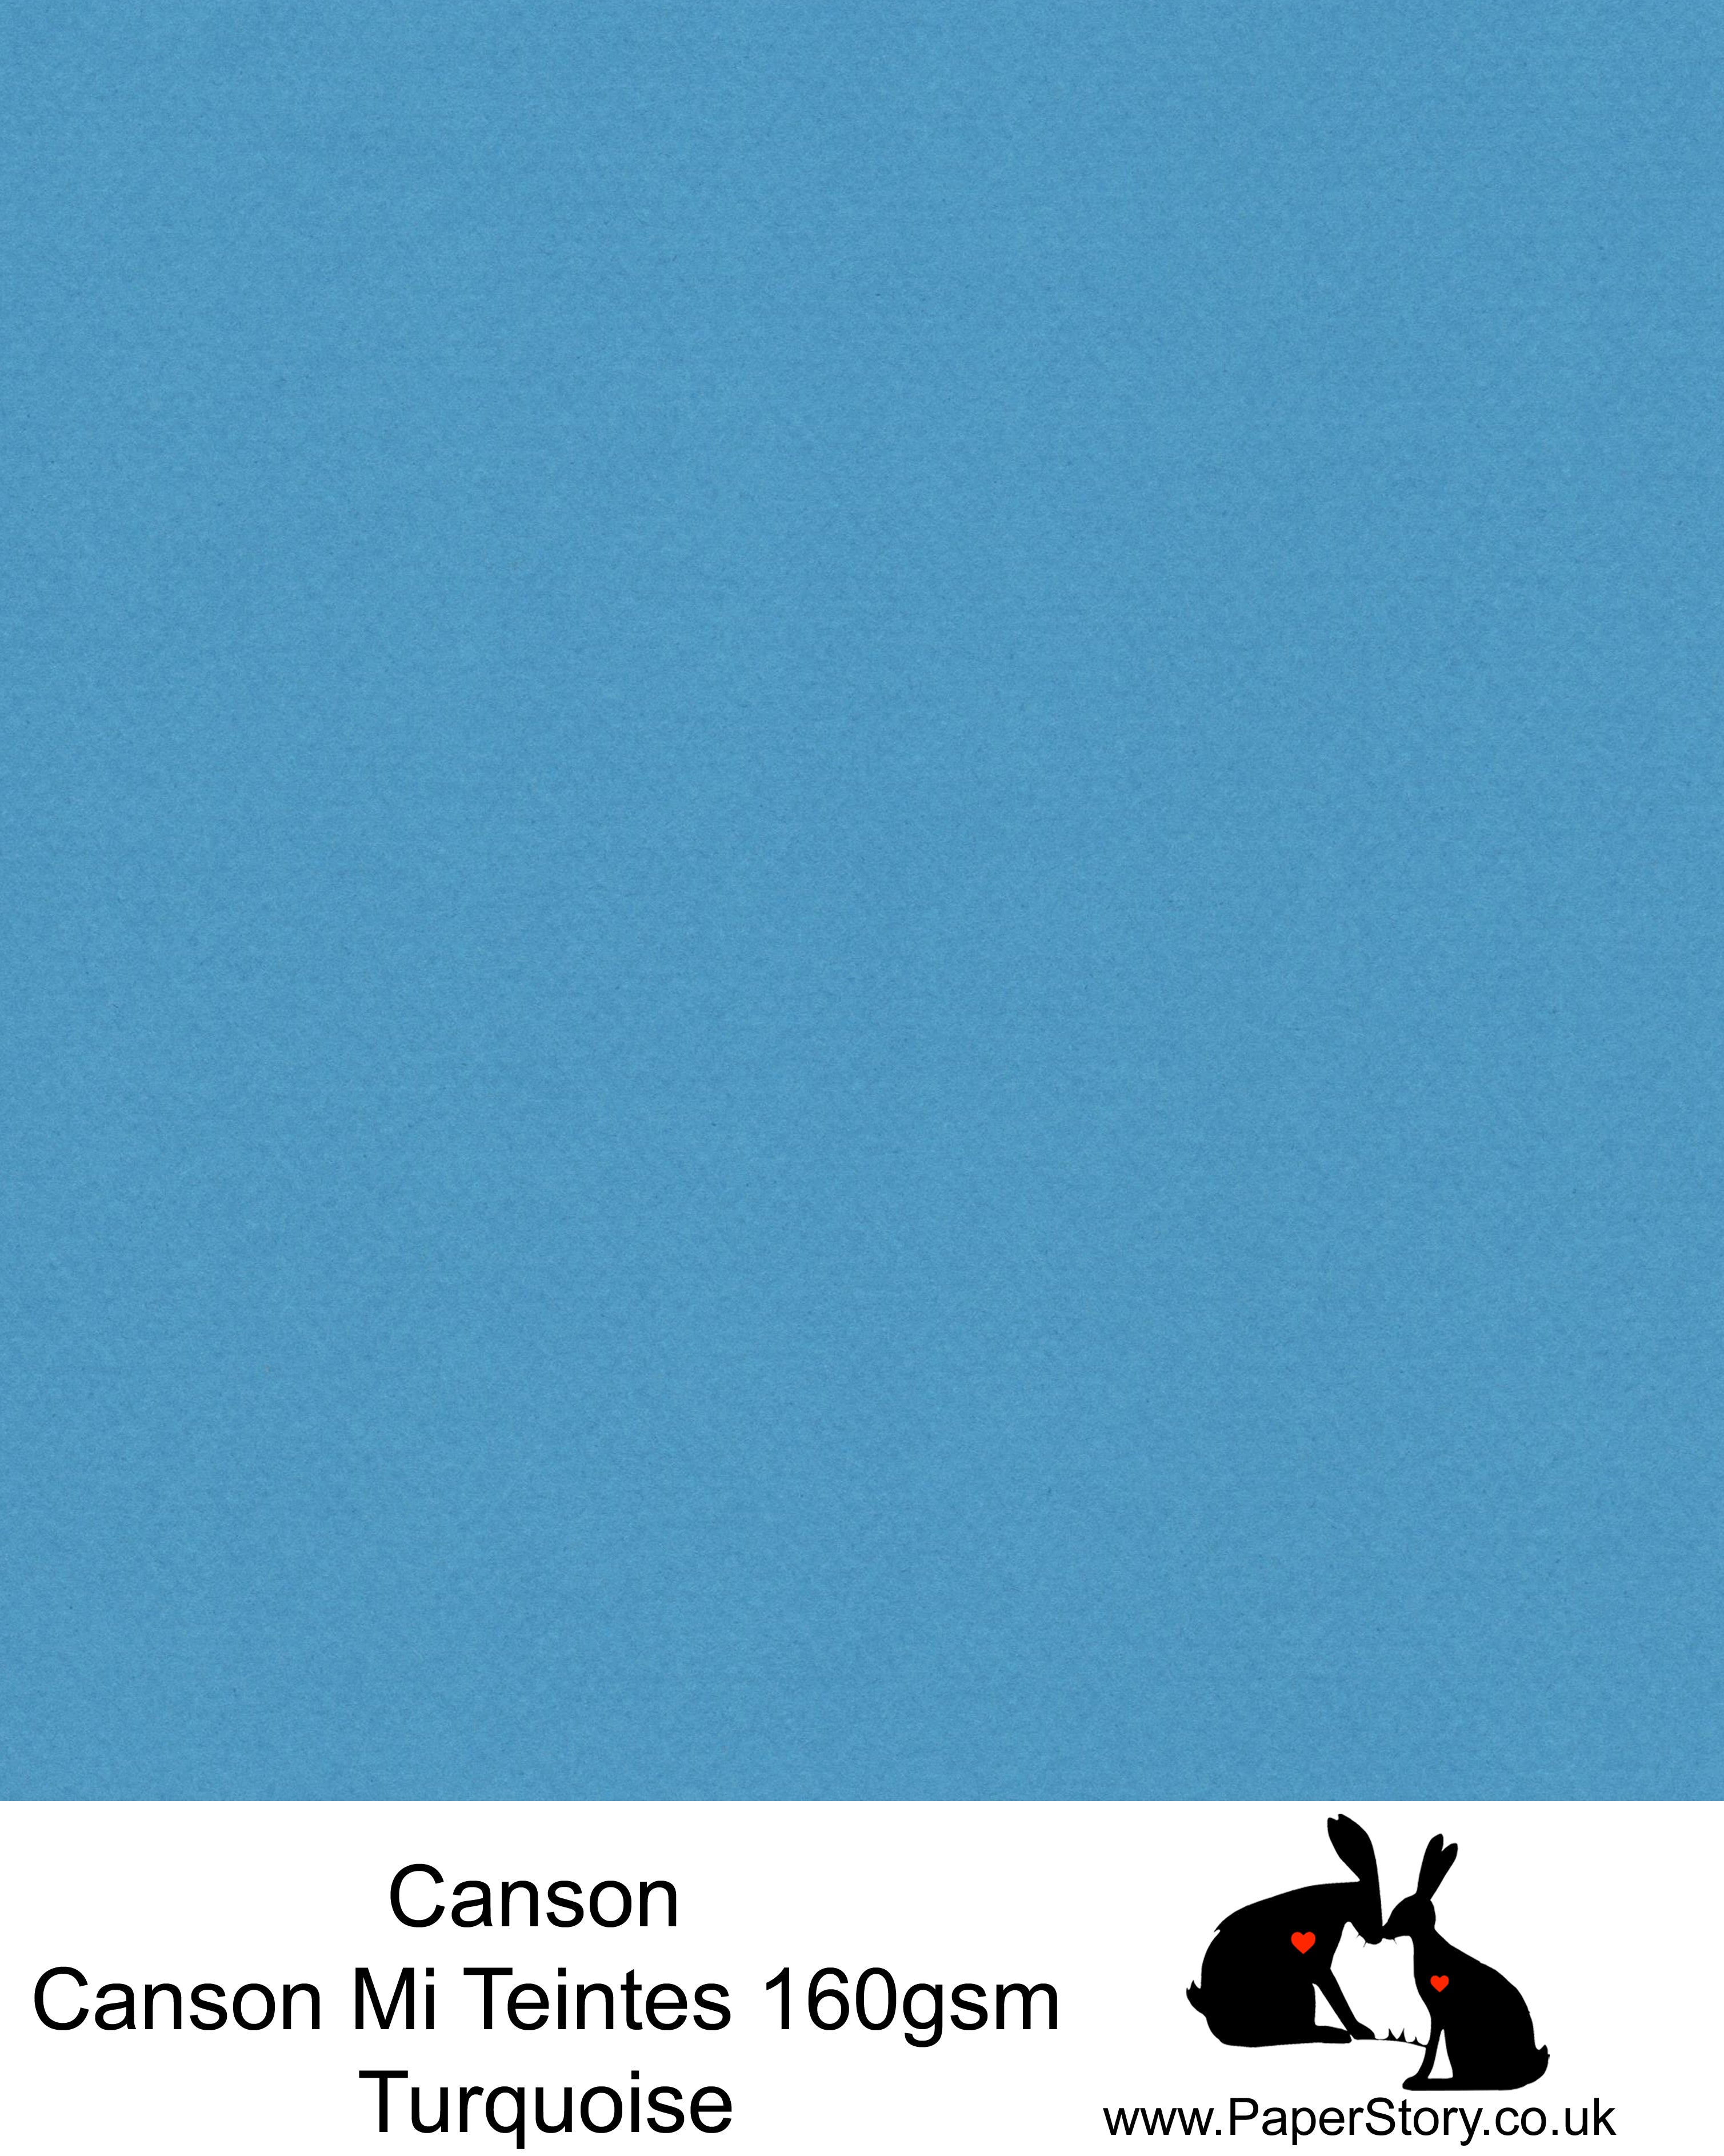 Canson Mi Teintes acid free, Turquoise sea blue, hammered texture honeycomb surface paper 160 gsm. This is a popular and classic paper for all artists especially well respected for Pastel  and Papercutting made famous by Paper Panda. This paper has a honeycombed finish one side and fine grain the other. An authentic art paper, acid free with a  very high 50% cotton content. Canson Mi-Teintes complies with the ISO 9706 standard on permanence, a guarantee of excellent conservation